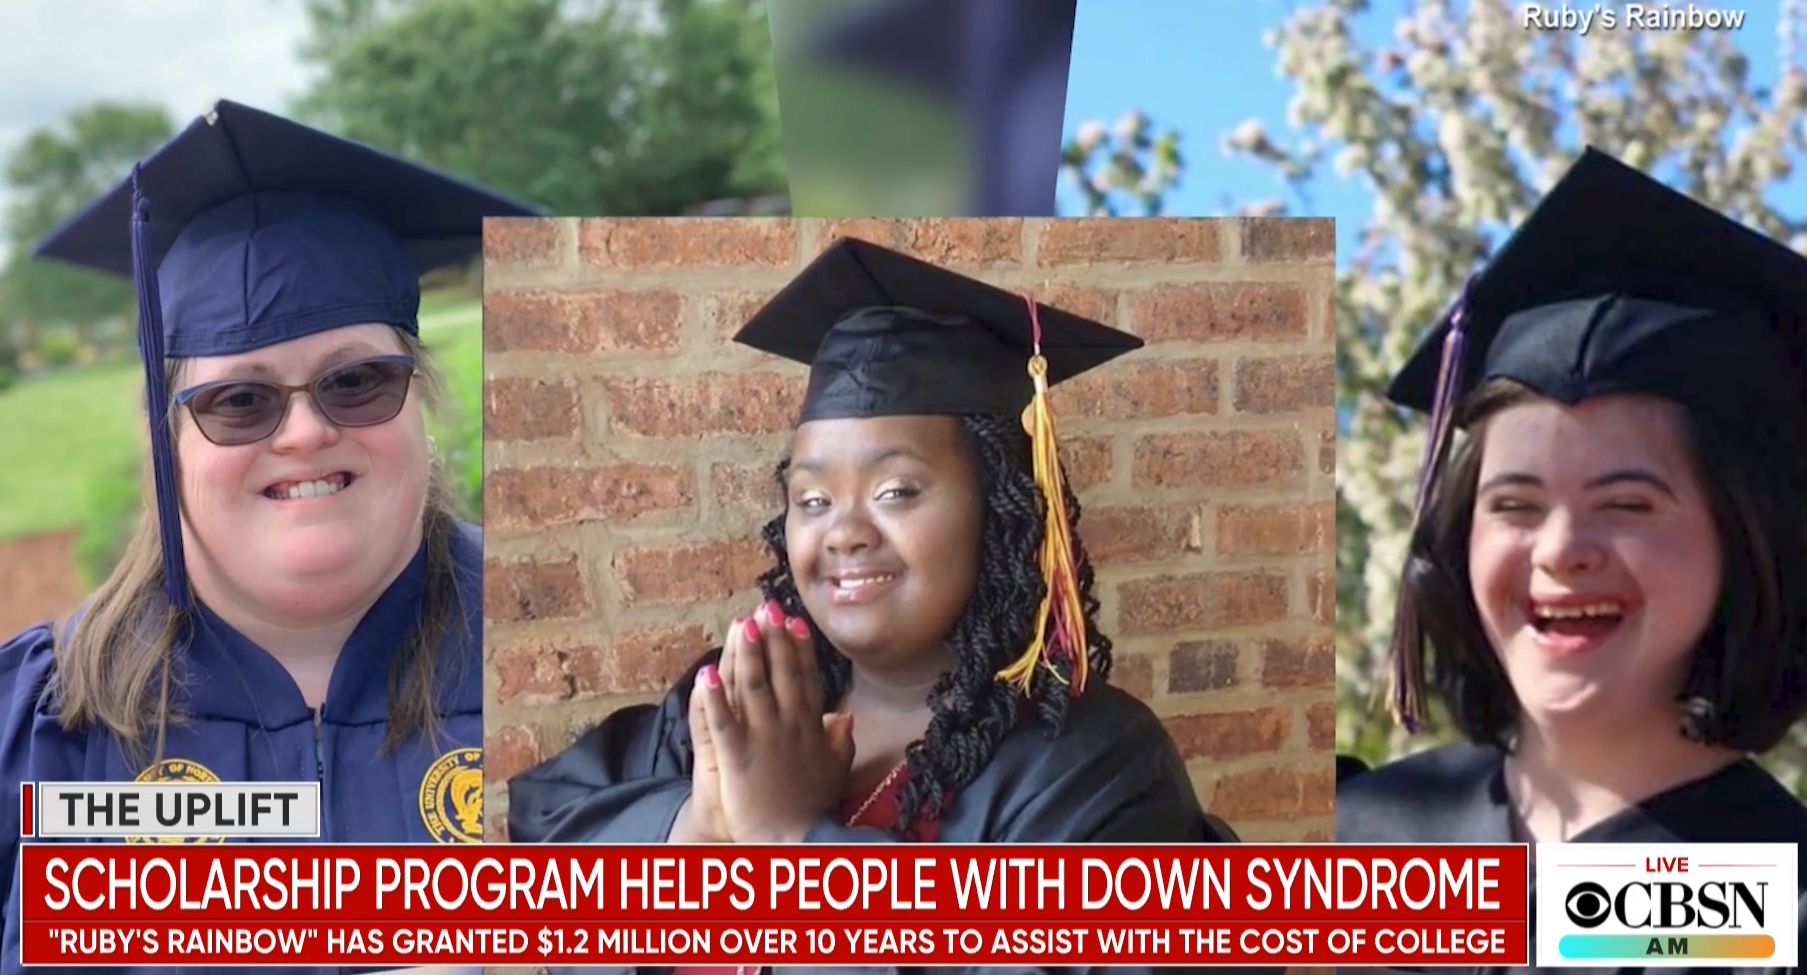 Mom and 10-year-old grant $1.2 million in scholarships to people with Down syndrome